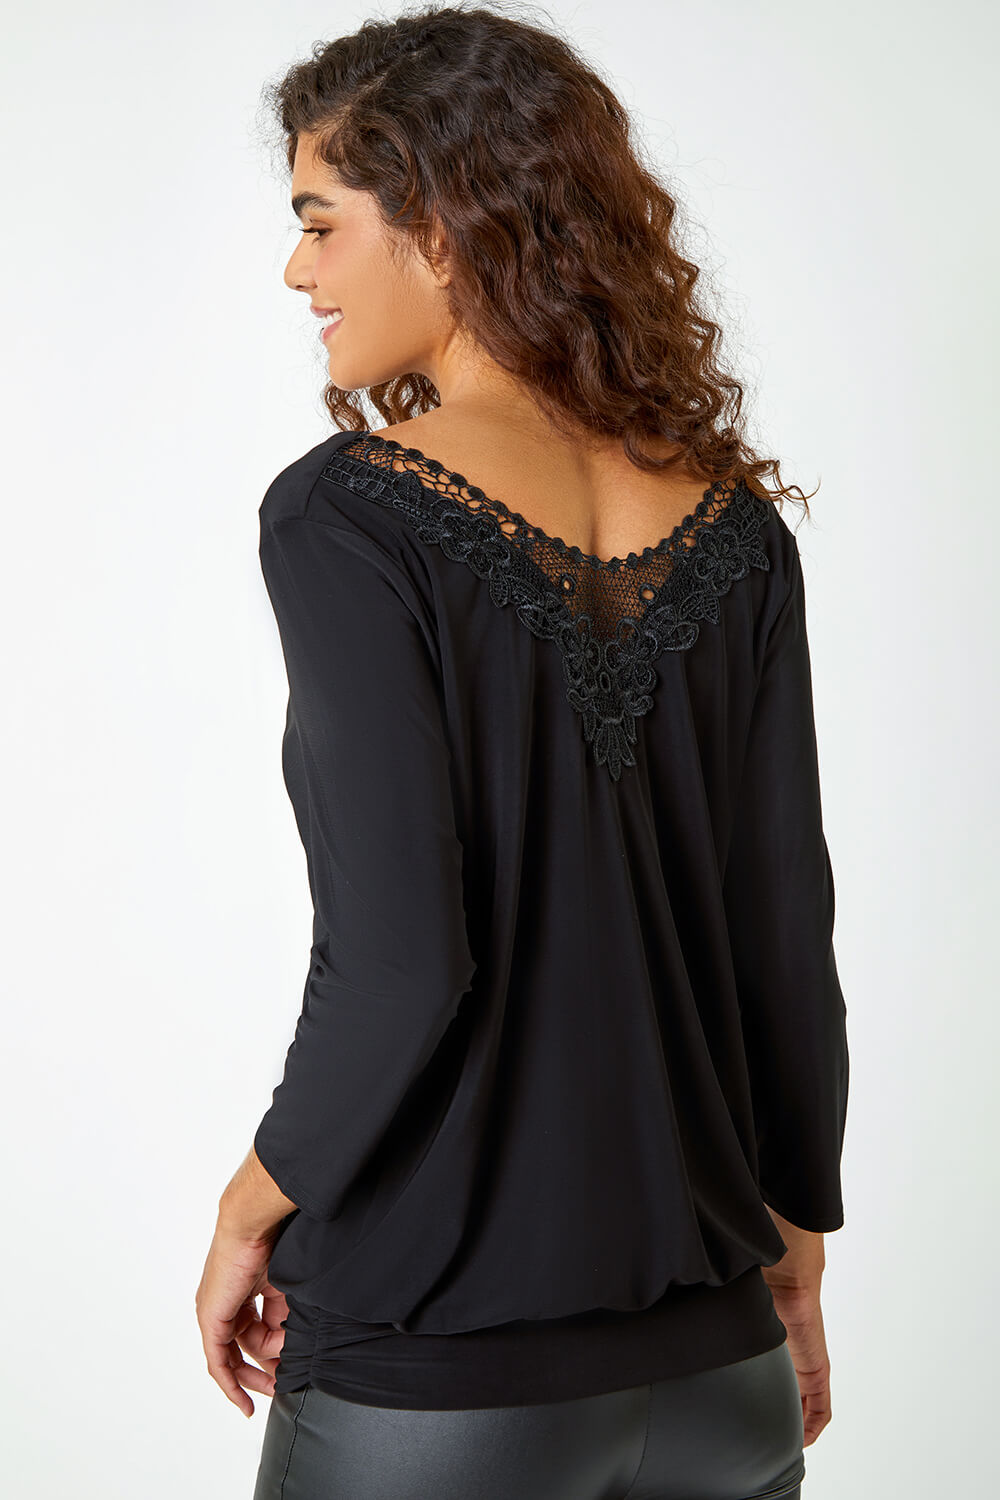 Black Lace Back Cowl Neck Stretch Top, Image 5 of 5